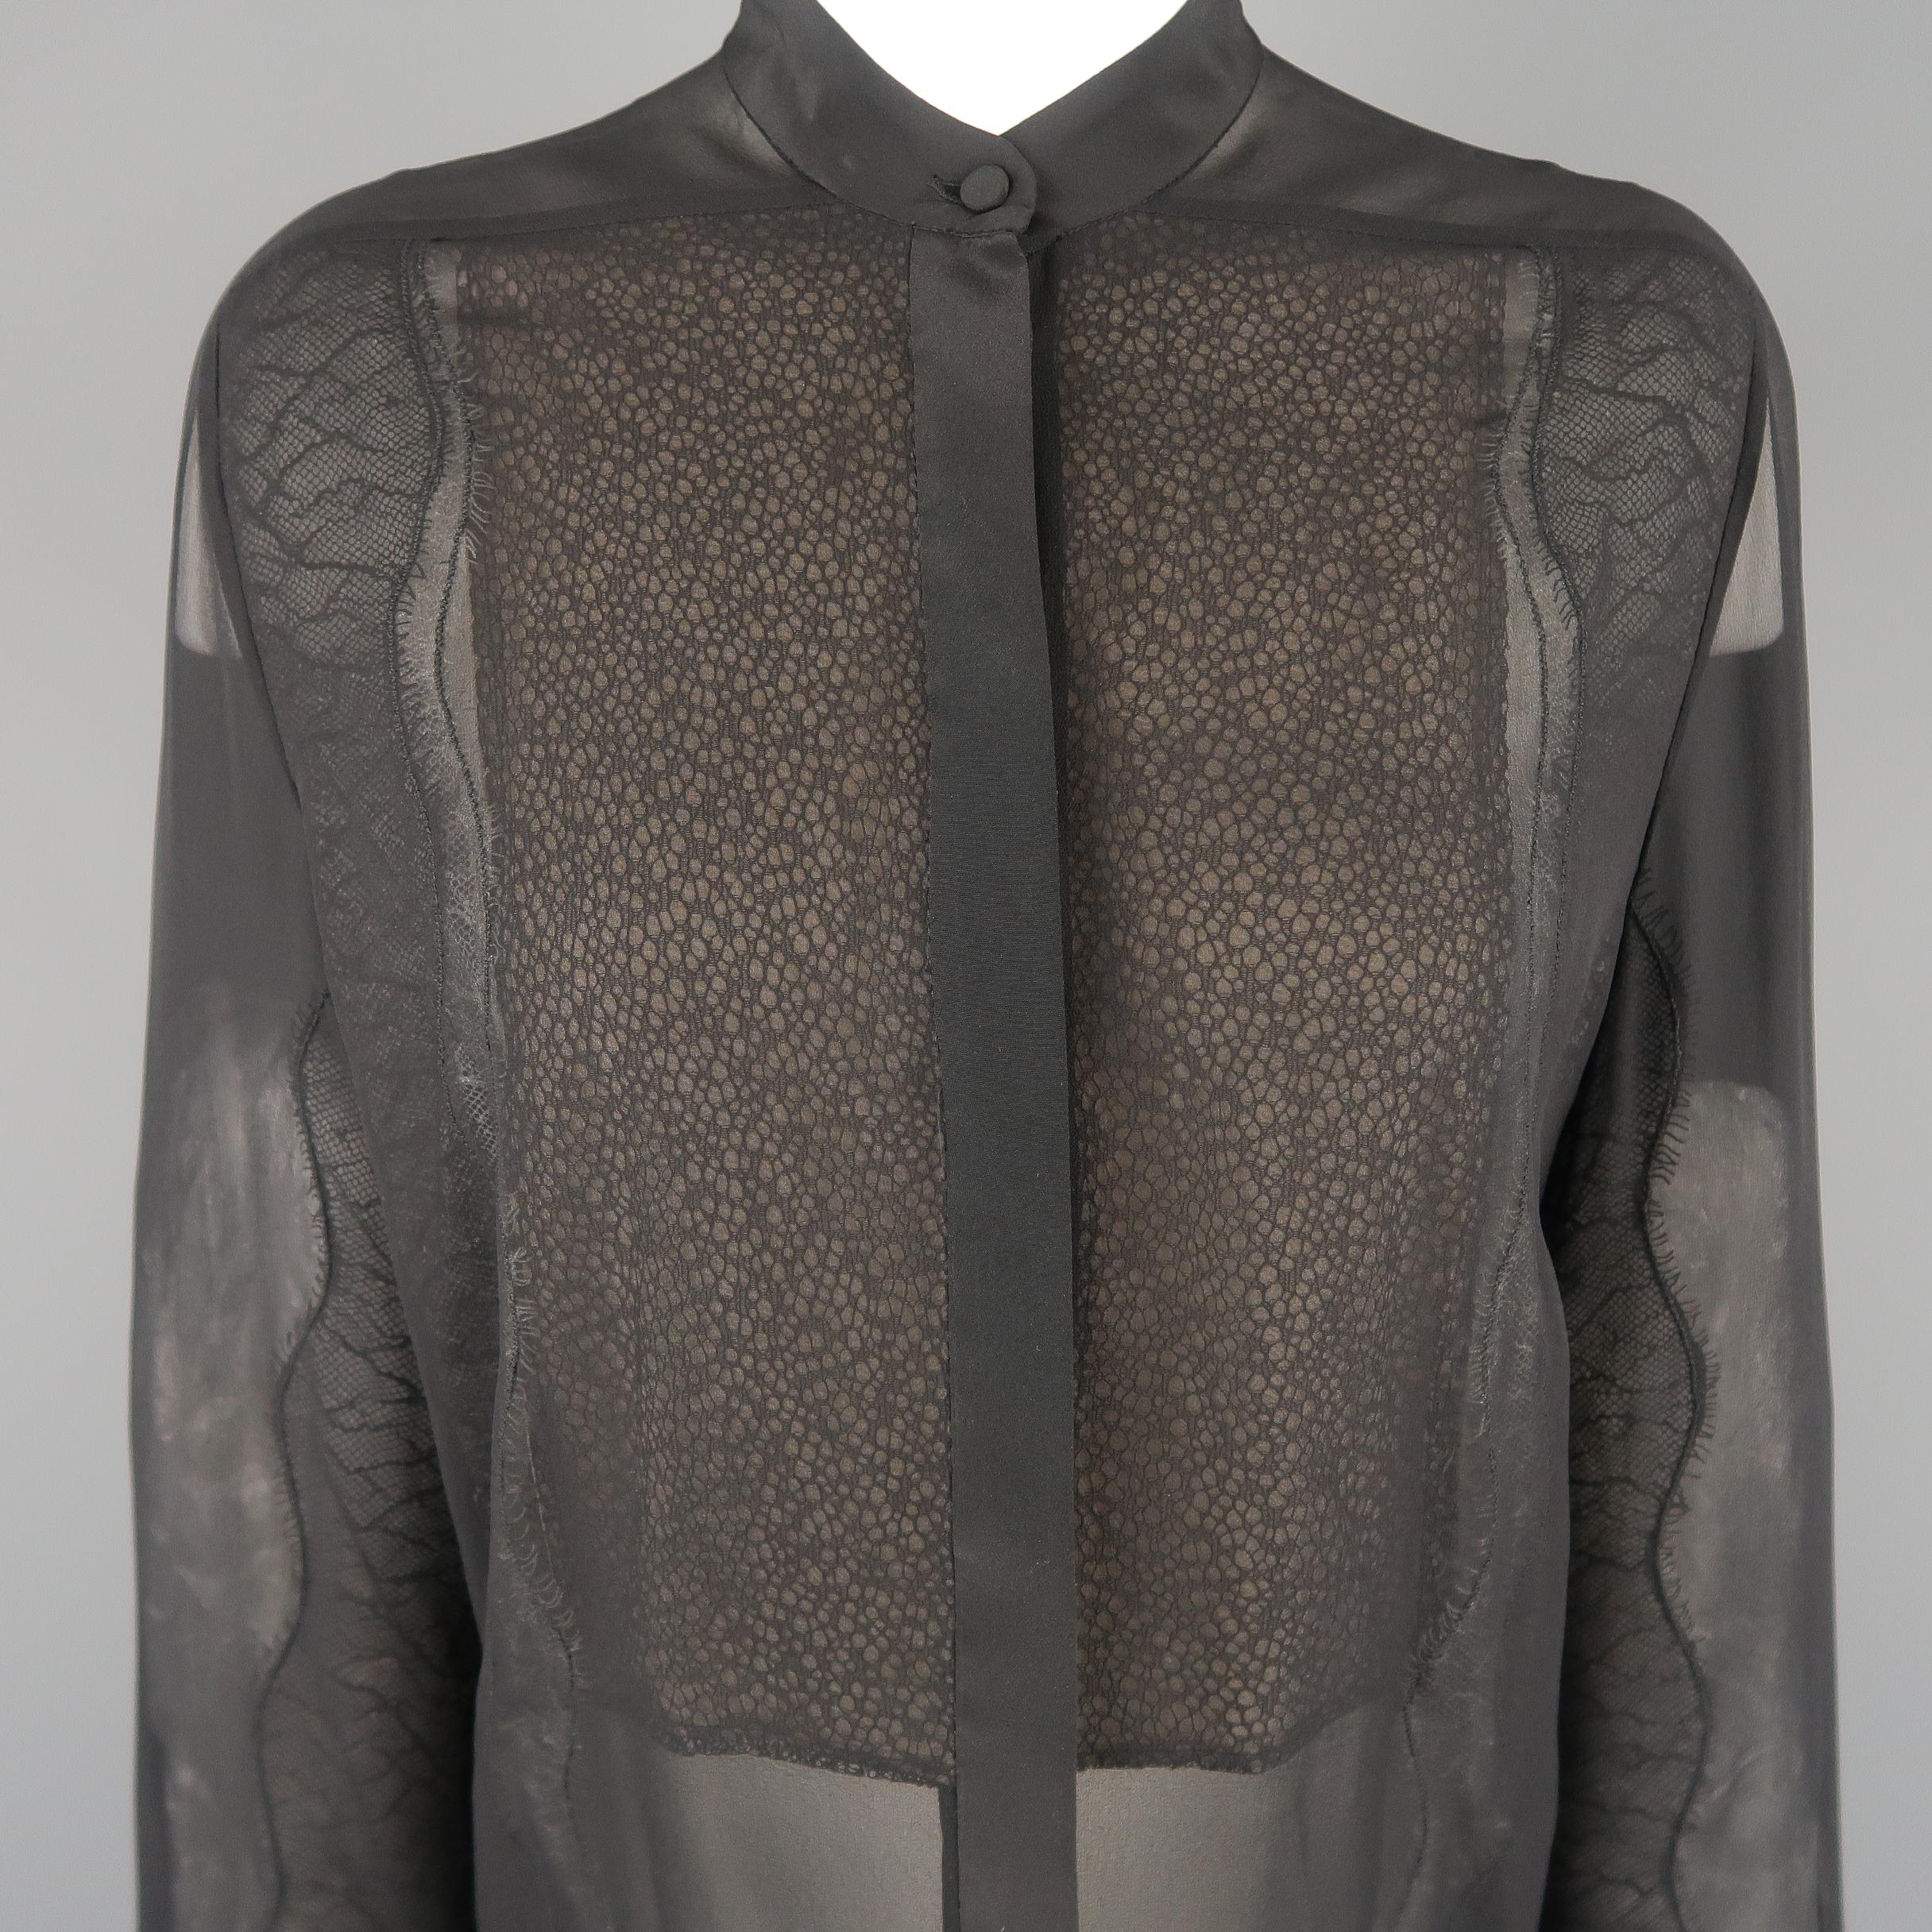 3.1 PILLIP LIM blouse come sin black silk chiffon with a band collar, hidden placket button front, and lace panels.
 
Excellent Pre-Owned Condition.
Marked: (no size)
 
Measurements:
 
Shoulder: 14 in.
Bust: 20 in.
Sleeve: 25 in.
Length: 29 in.